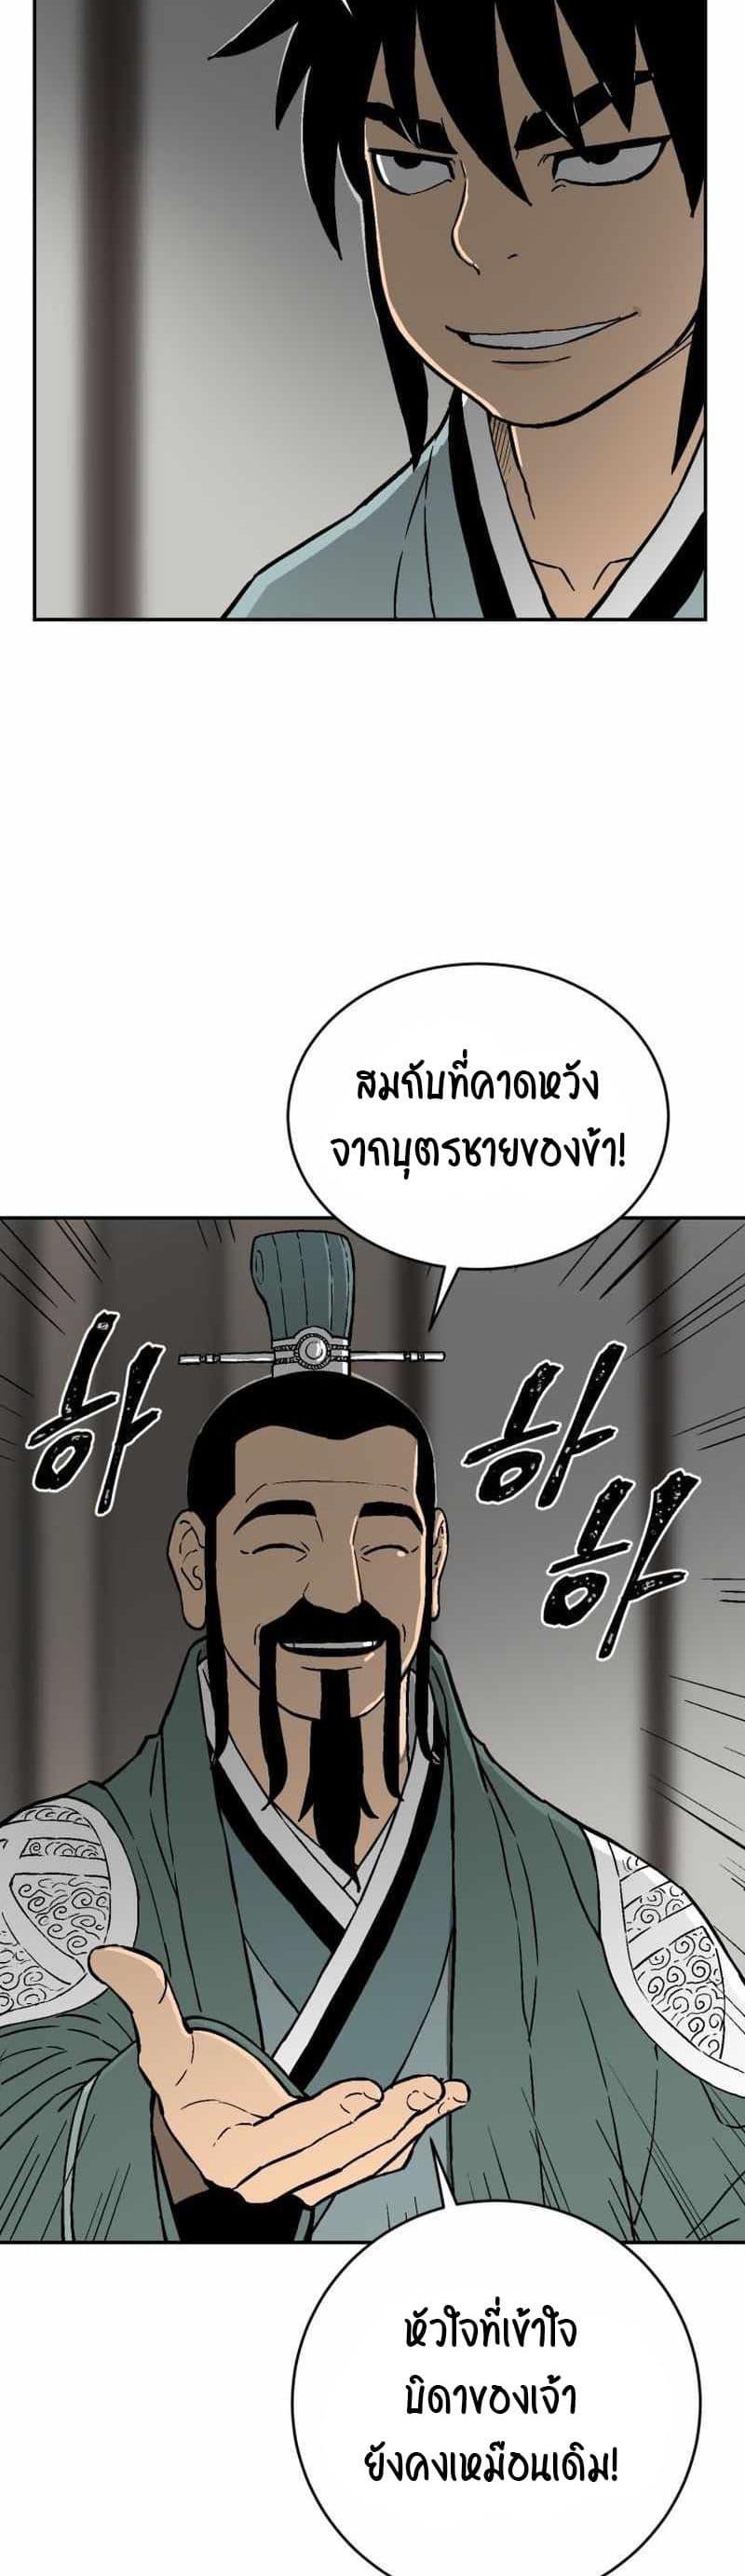 Tales of A Shinning Sword ตอนที่ 4 (48)